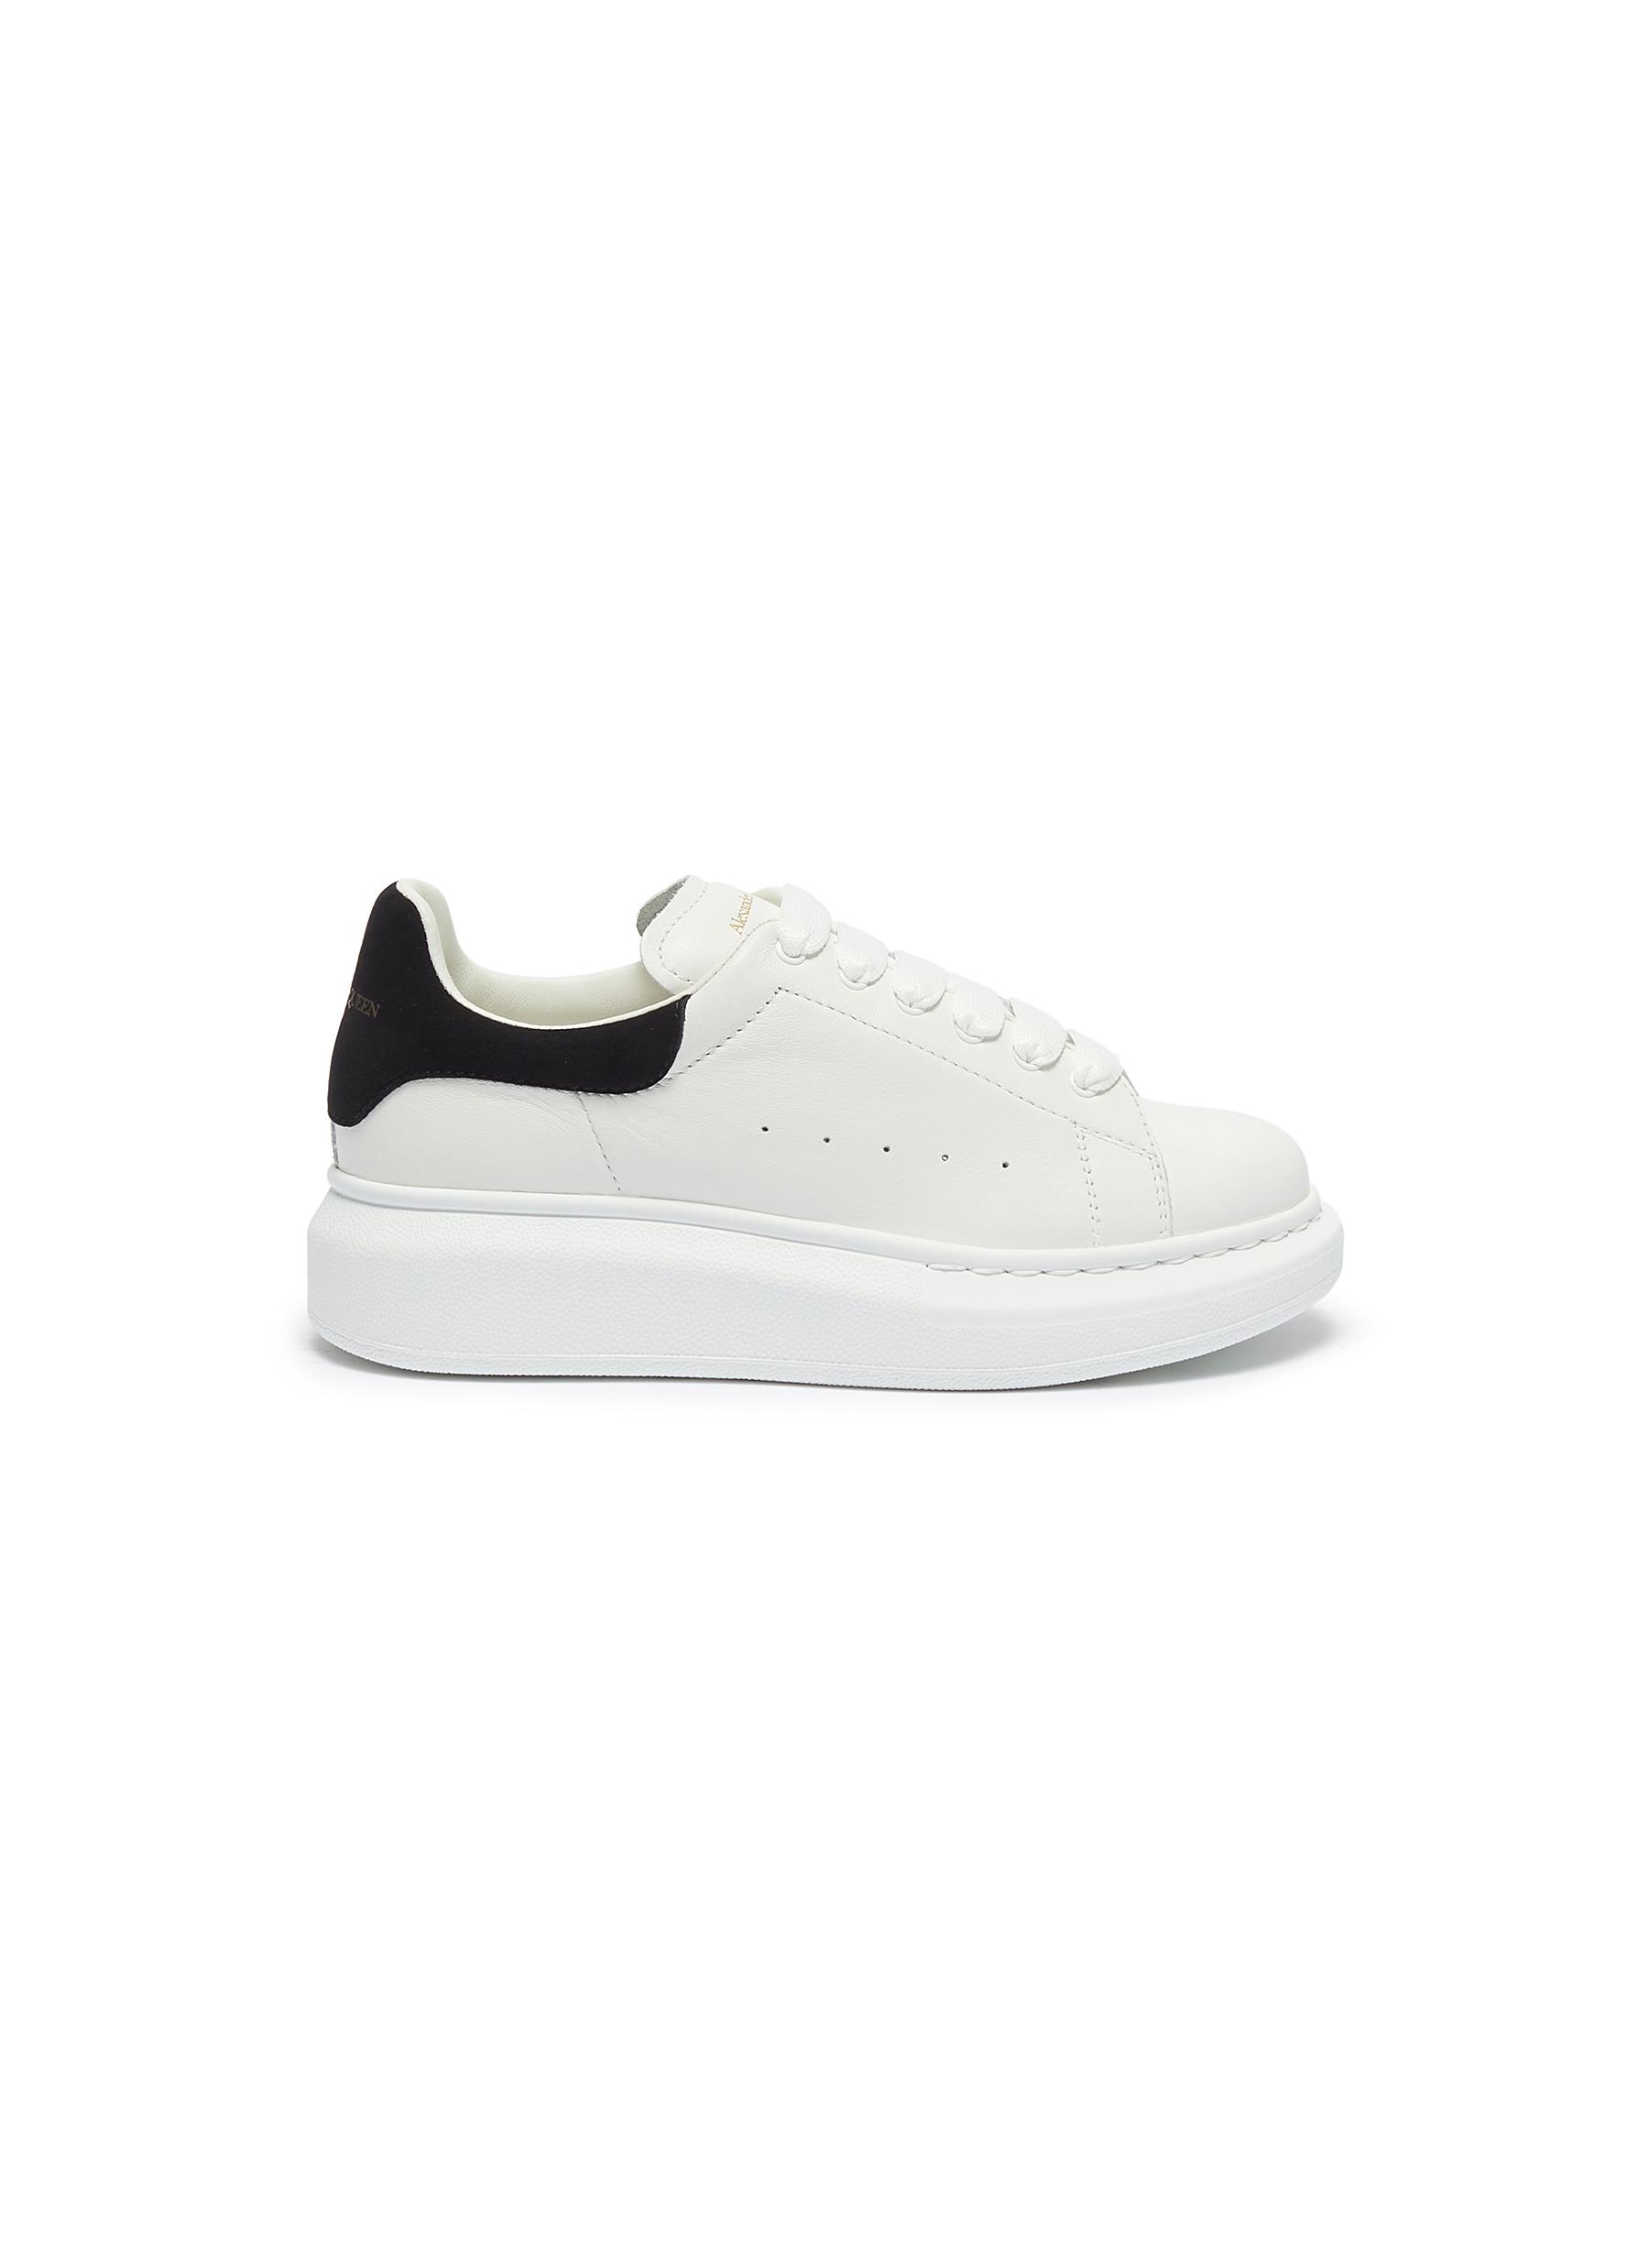 alexander mcqueen shoes white and black